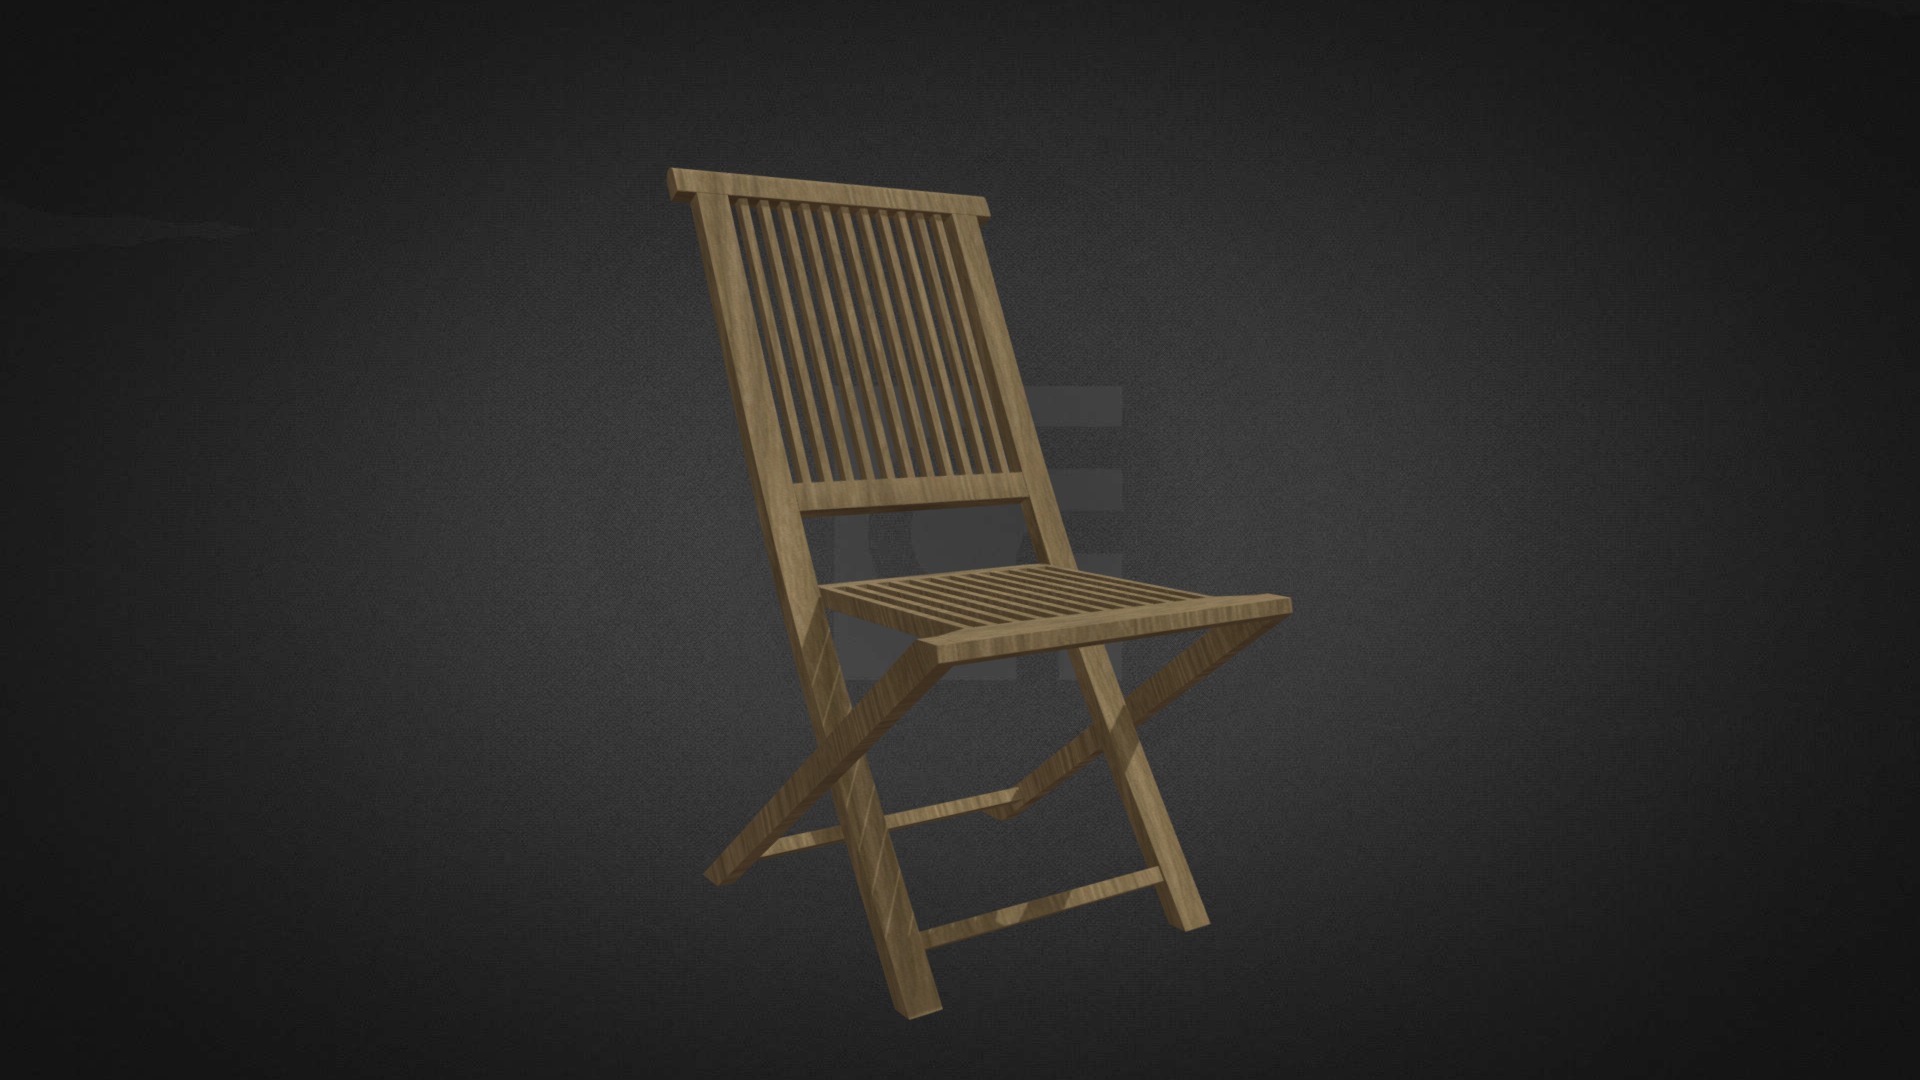 3D model Garden Chair Hire - This is a 3D model of the Garden Chair Hire. The 3D model is about a chair on a black background.